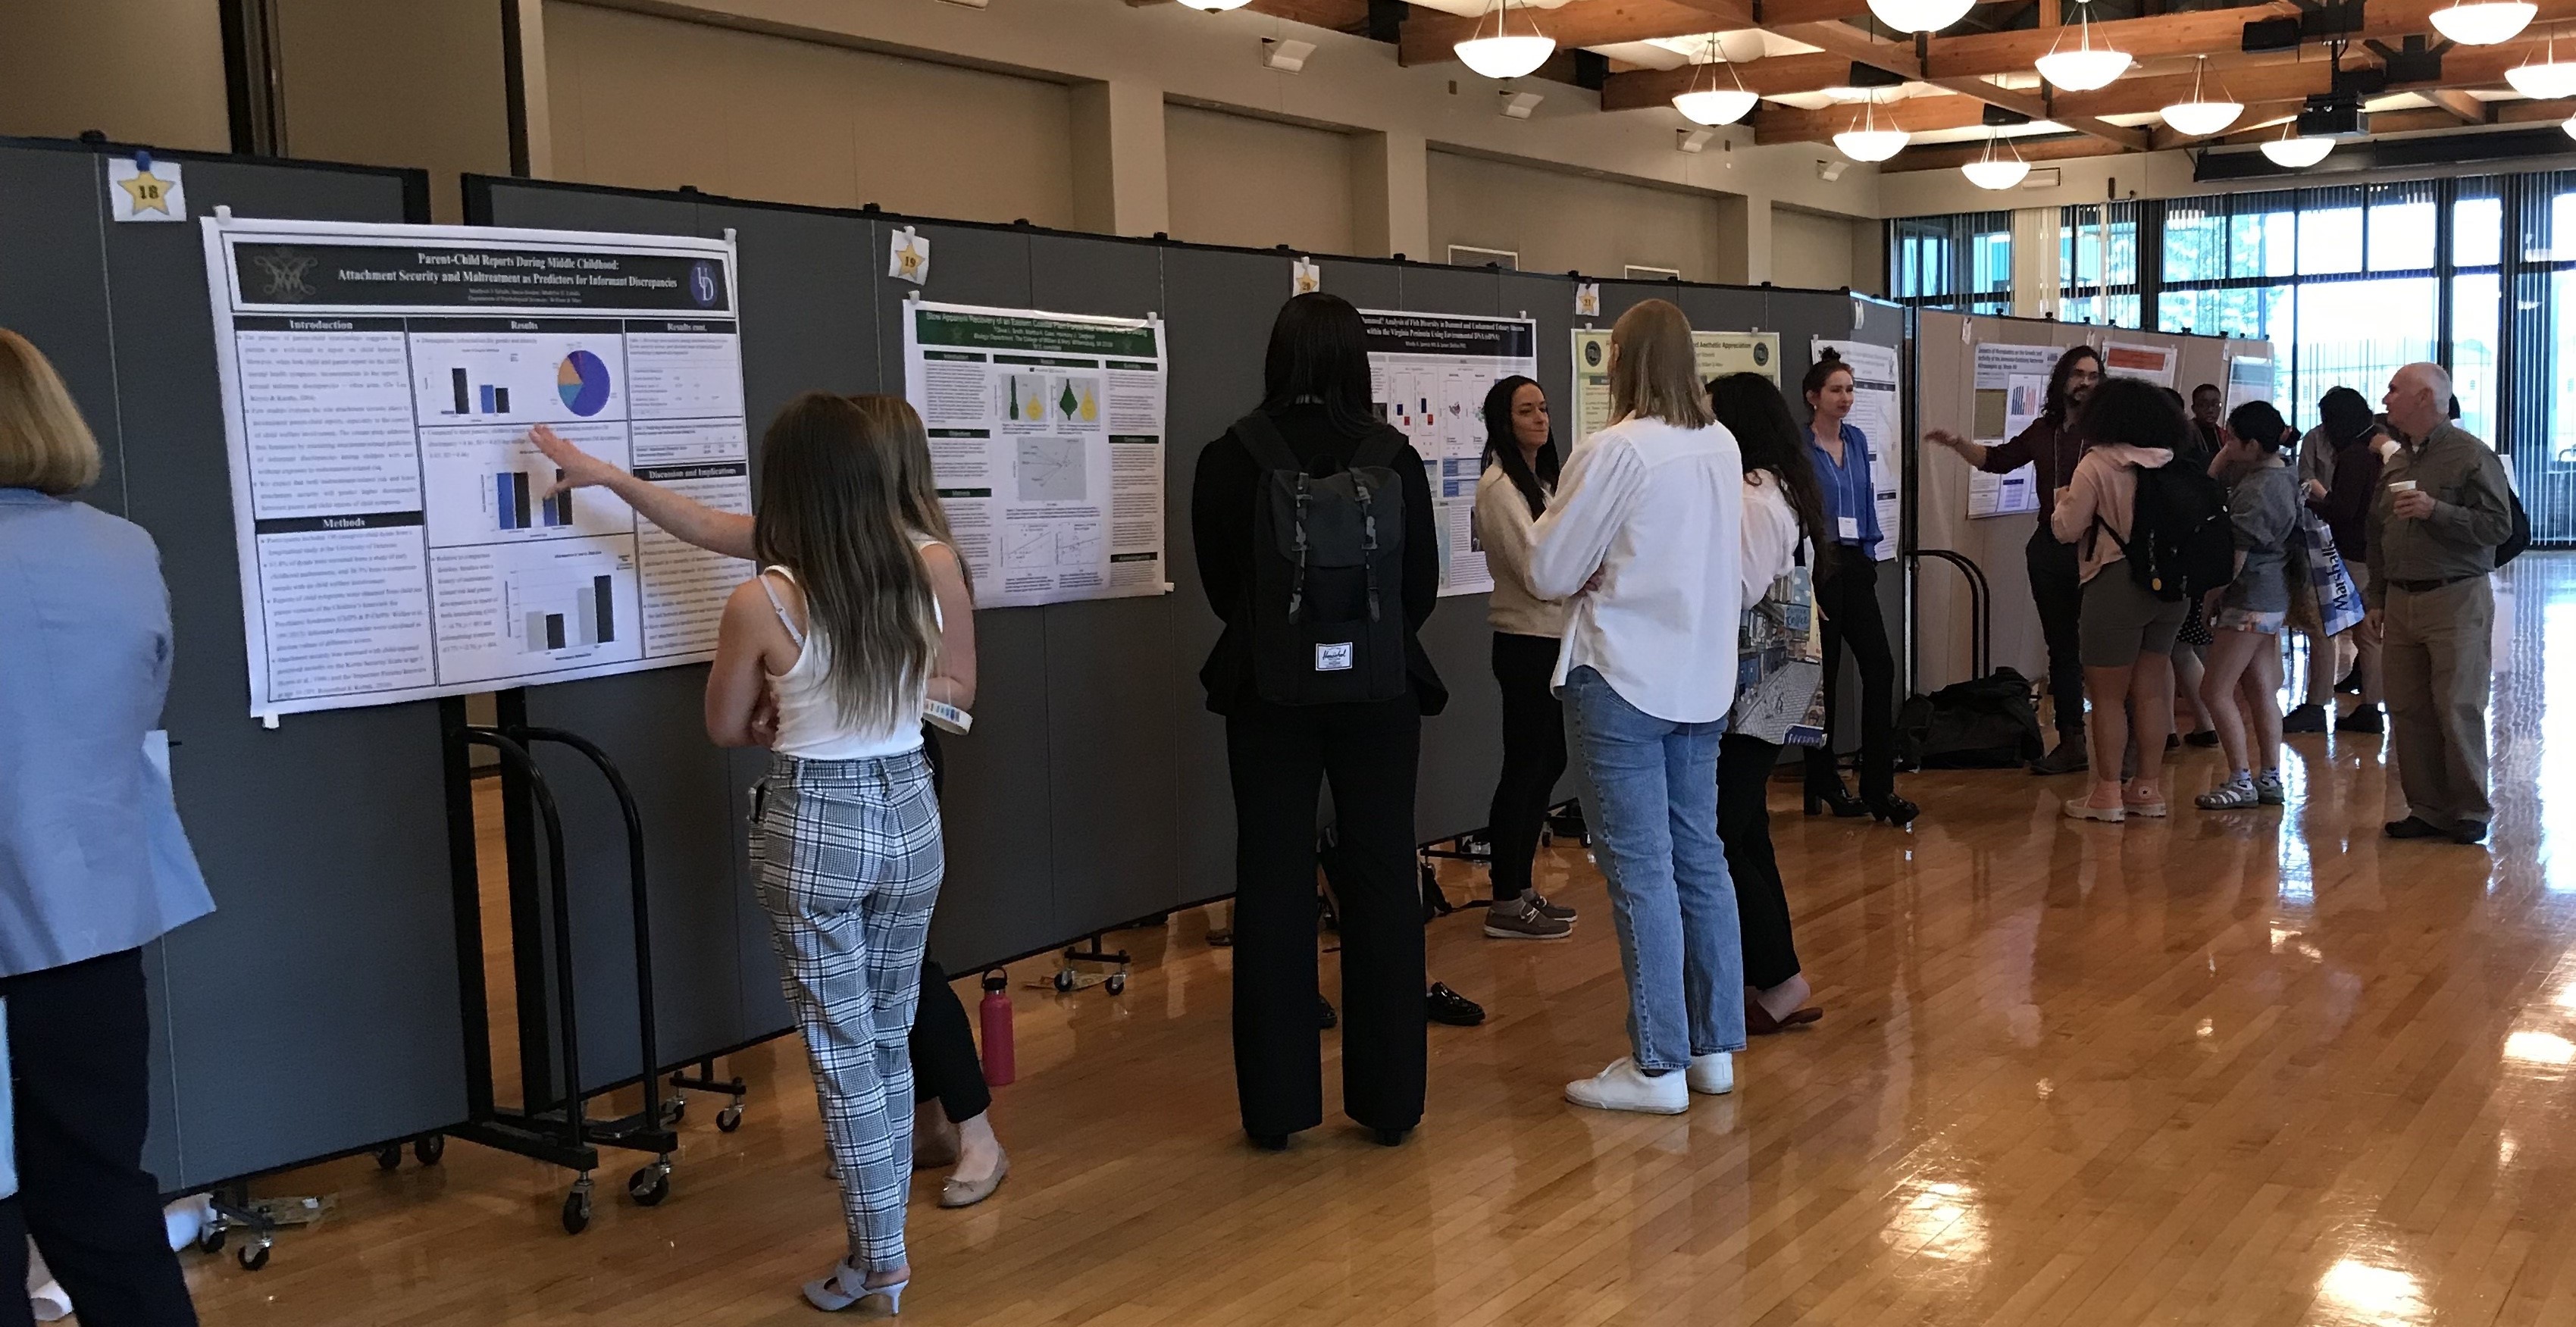 The Graduate & Honors Research Symposium, held March 20-22 in William & Mary's Sadler Center, featured a range of student panel presentations, poster sessions, and speech competitions. (photo by Sarah Glosson)